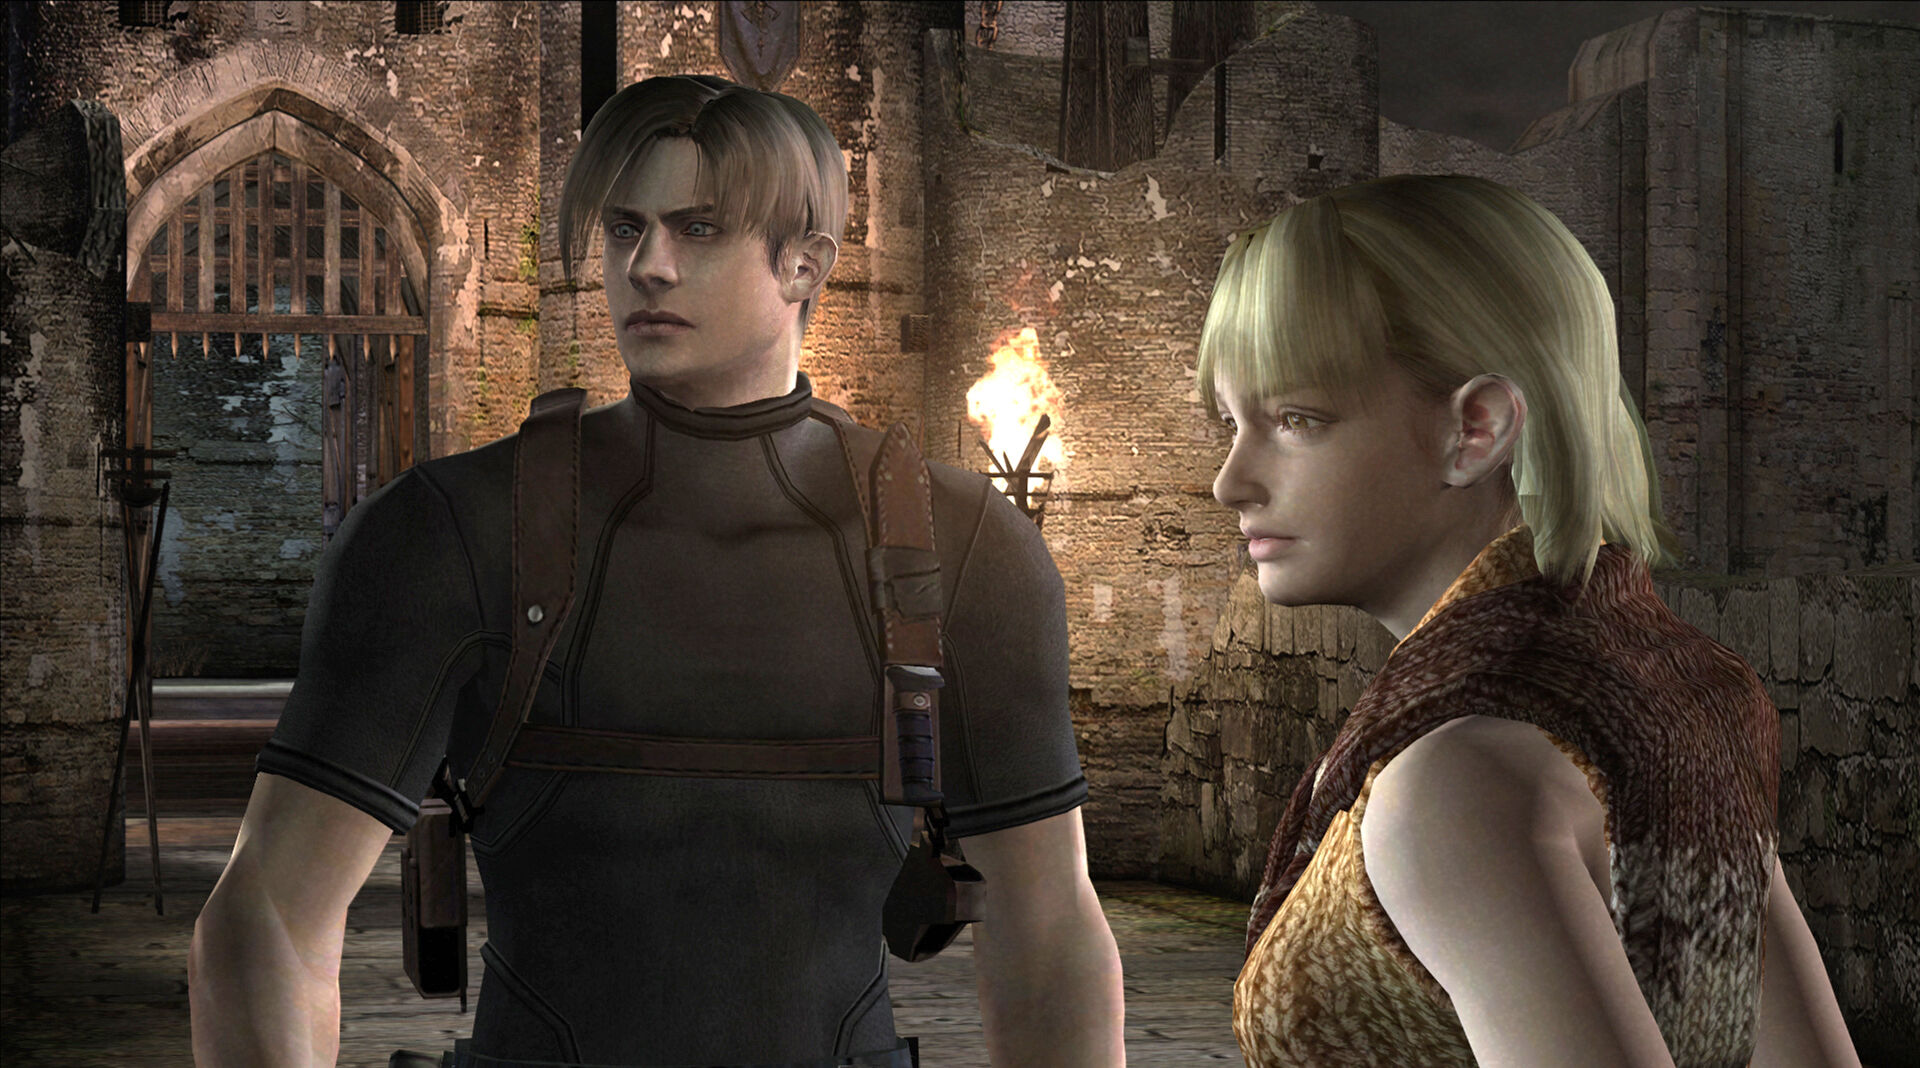 Resident Evil 4 Remake May See Changes in Storyline